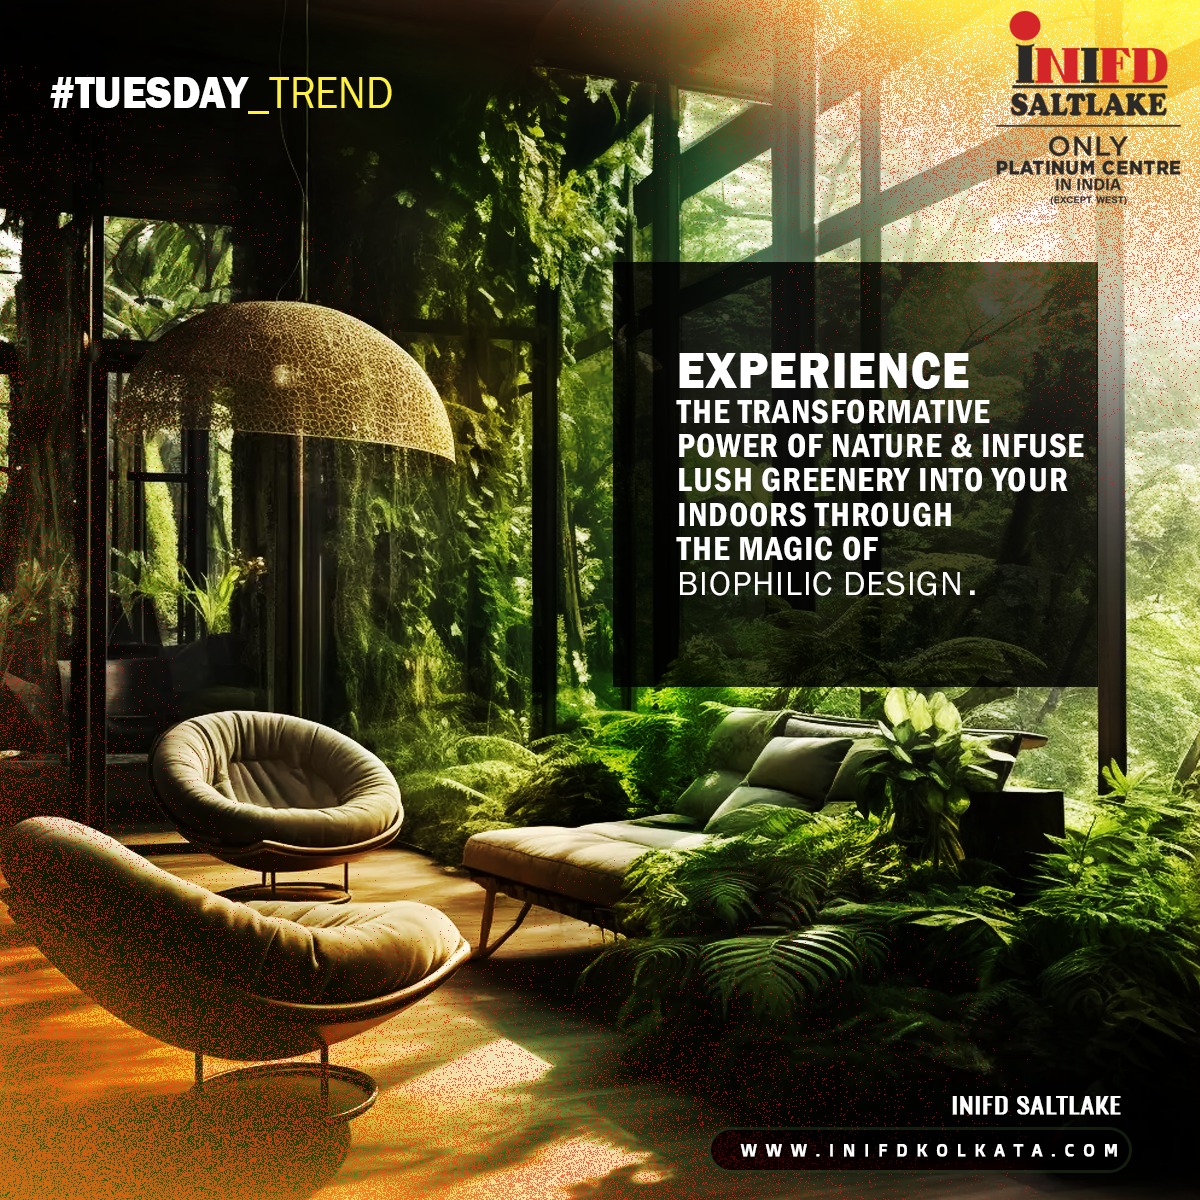 || Tuesday Trend ||

Experience the transformative power of nature and infuse lush greenery into your indoors through the magic of Biophilic design. ✨ 

#INIFDSaltlake #INIFDKolkata #PlatinumcentreinIndia #tuesdaytrend #indoor #biophilicdesigner